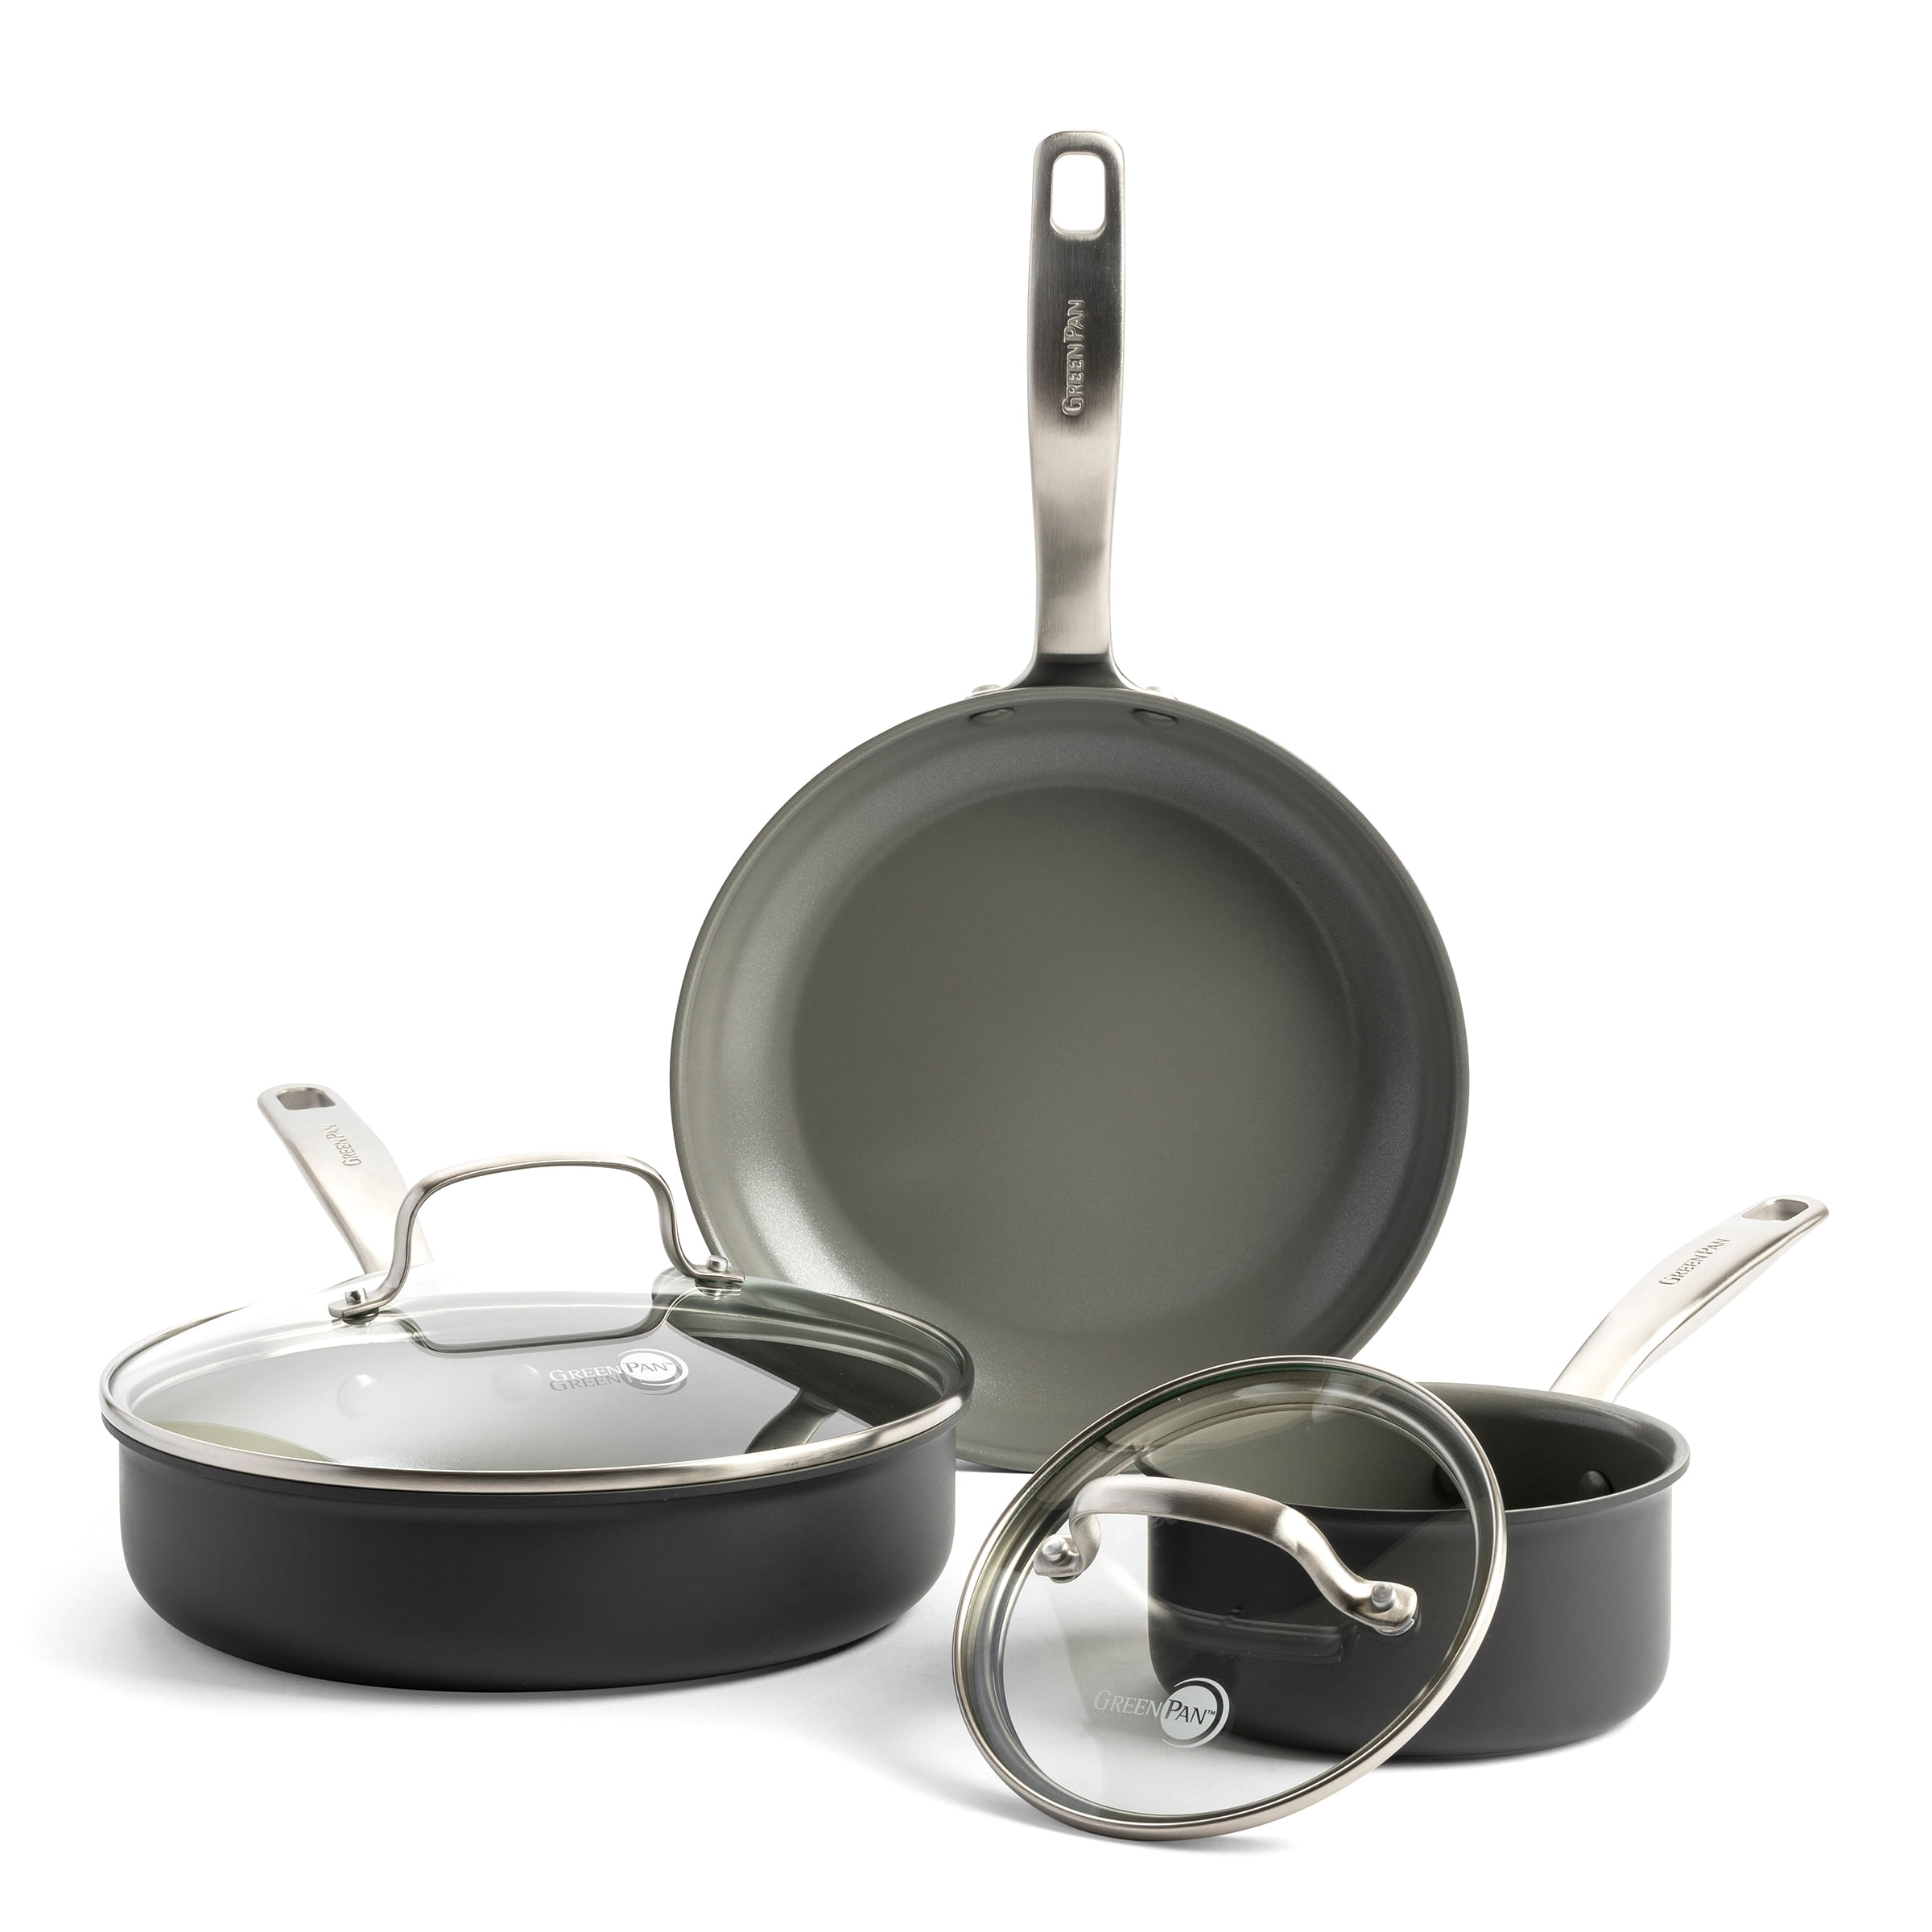 The Cookware Company GreenPan Reserve Nonstick 5-Piece